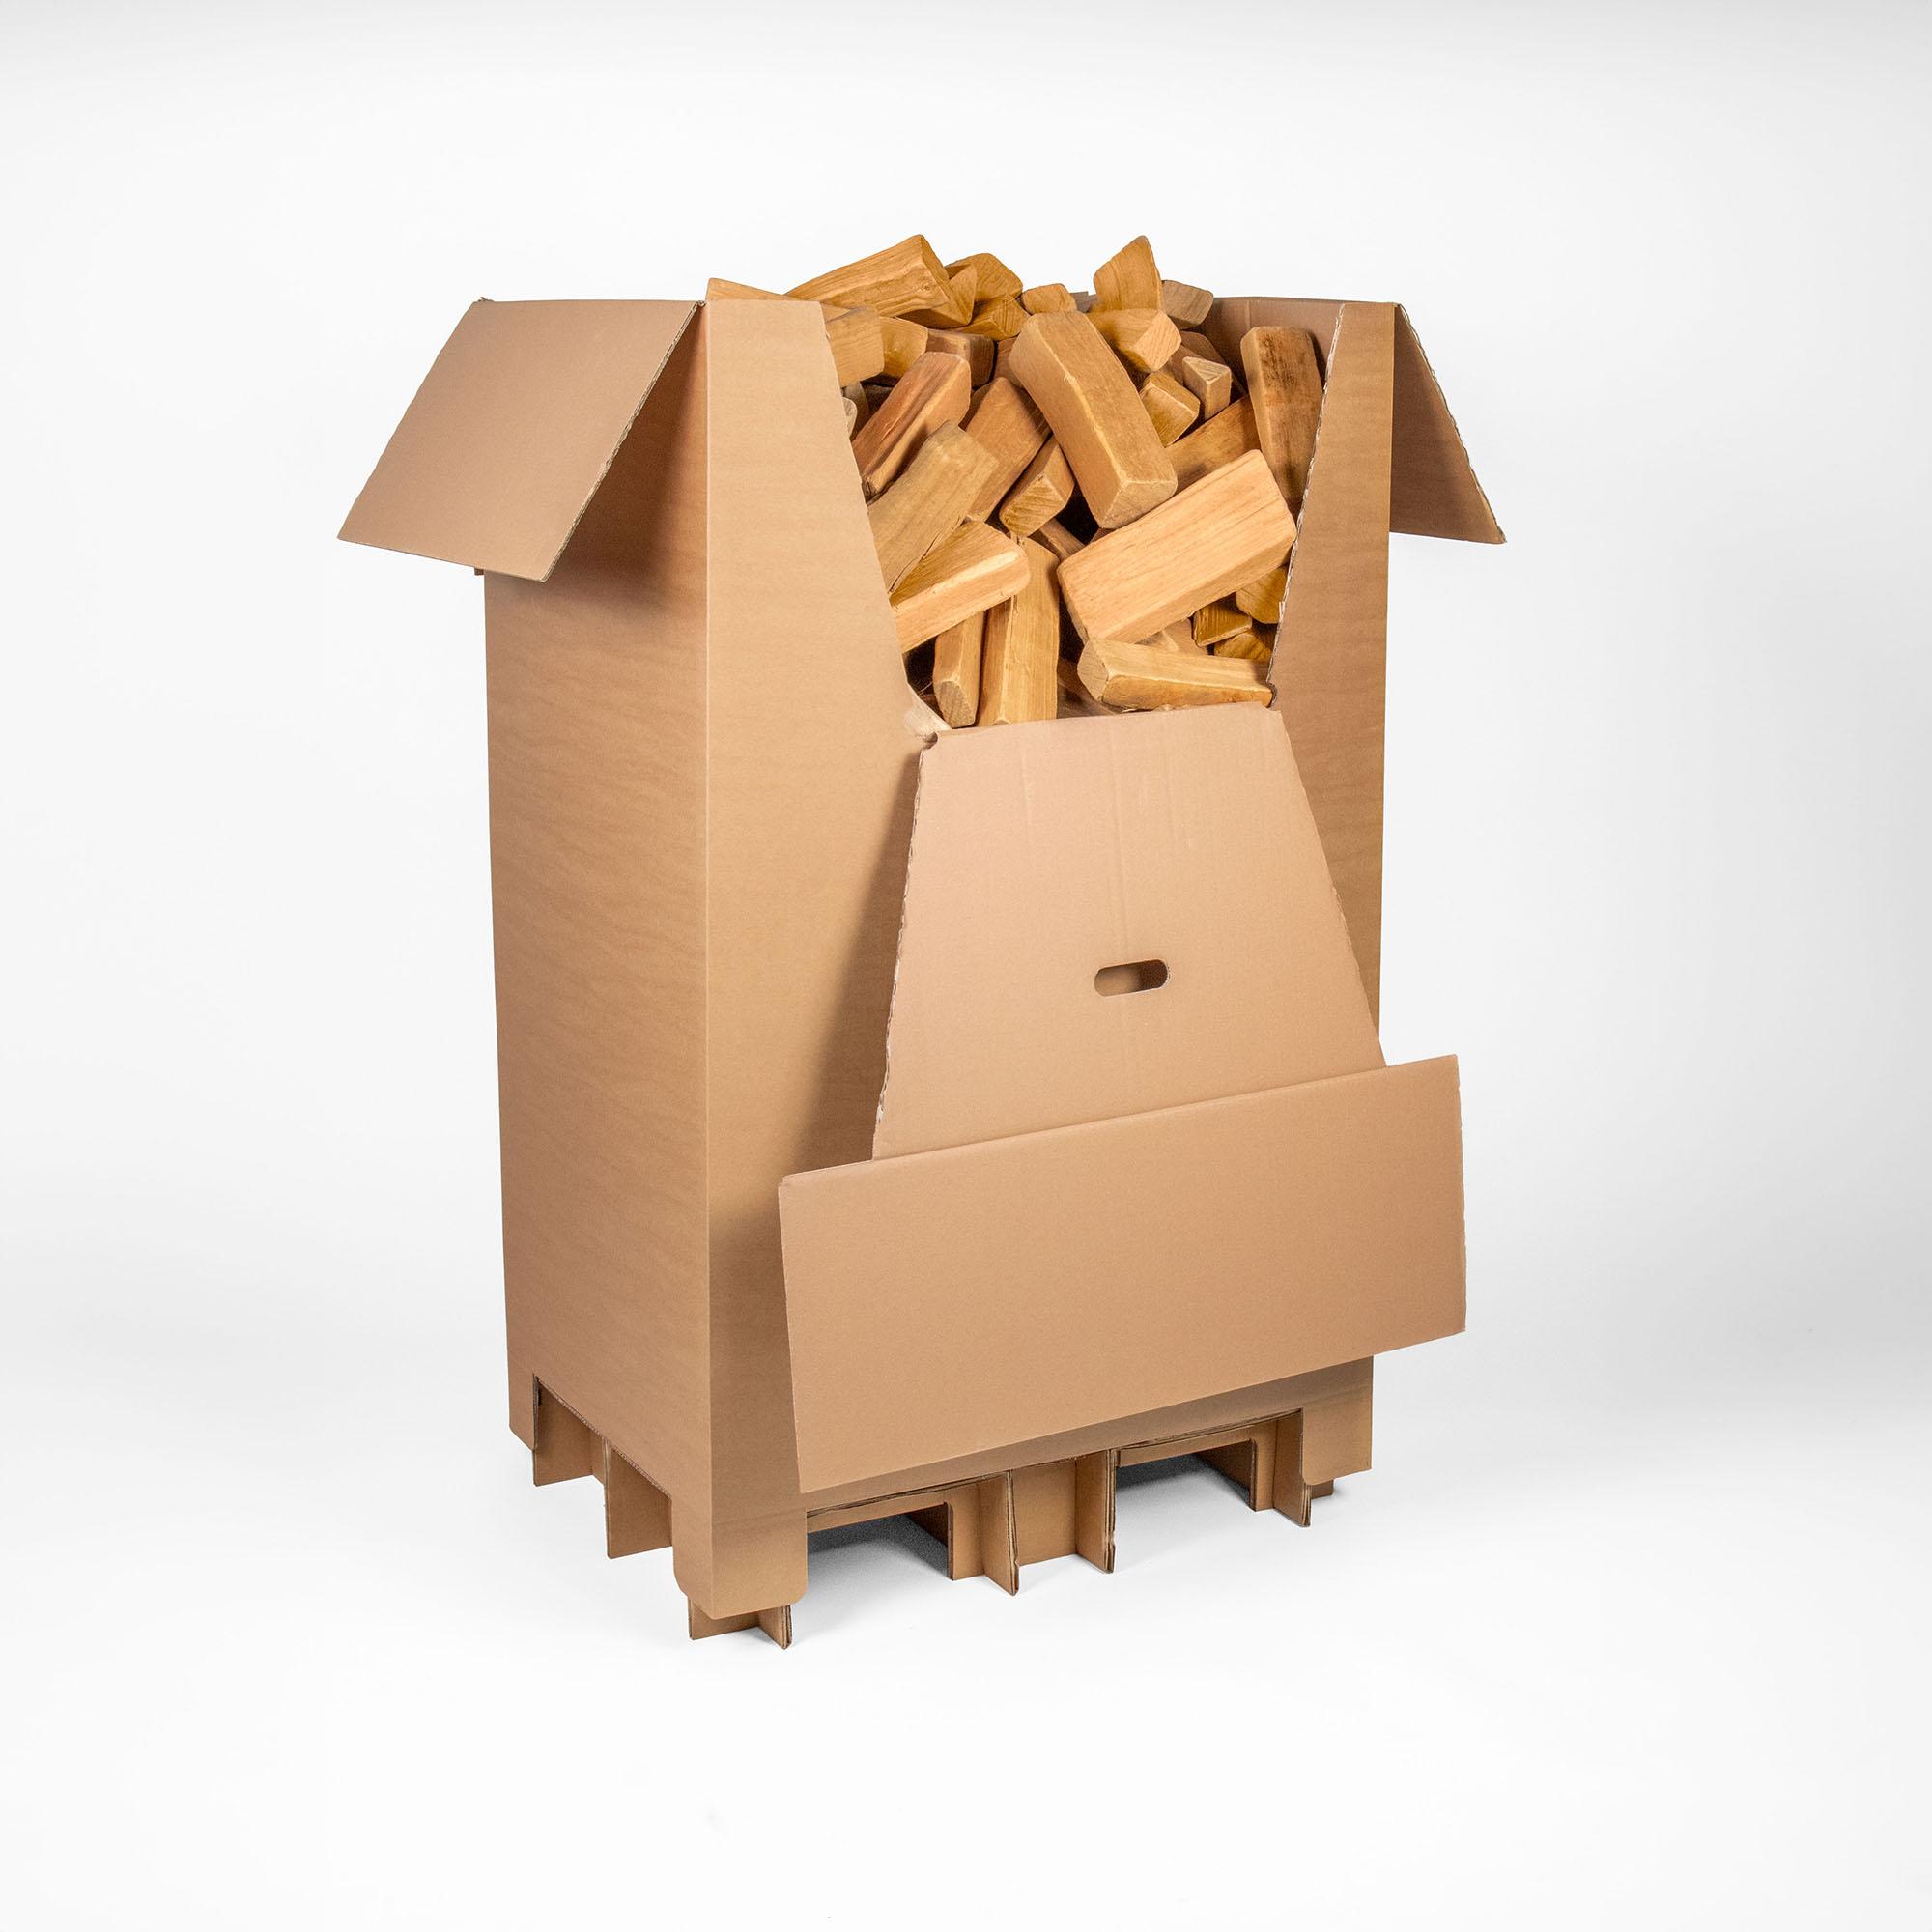 Firewood Cherry 25cm in a Large Carton